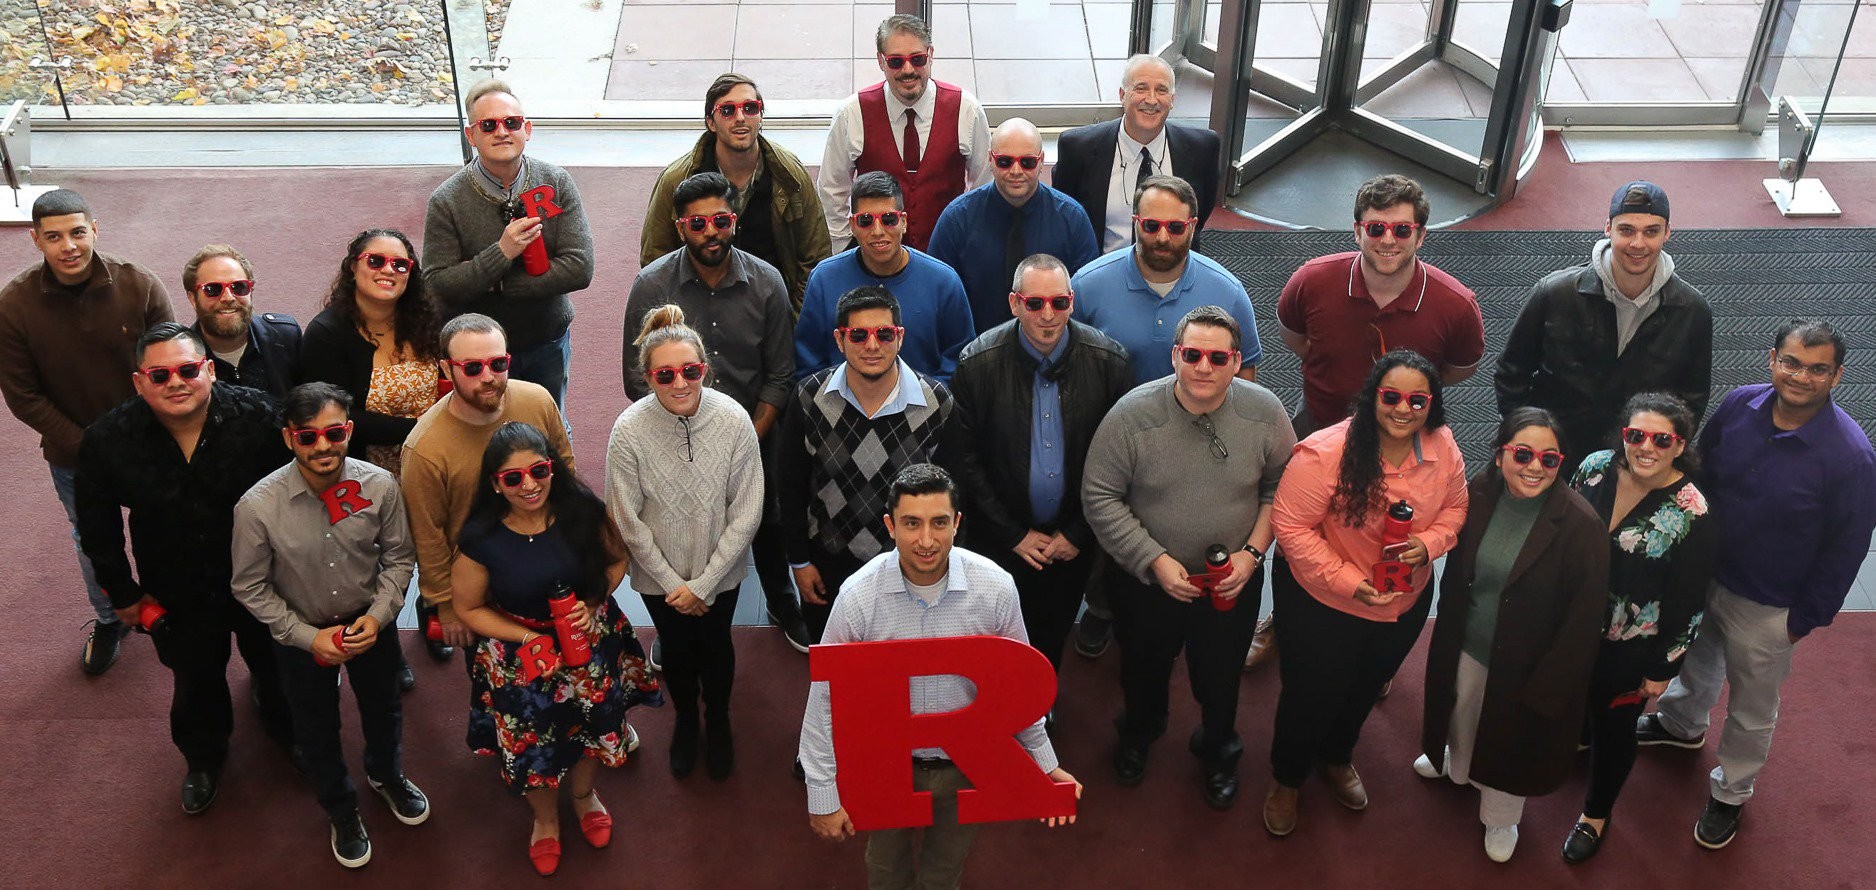 Rutgers boot camp students holding the letter R